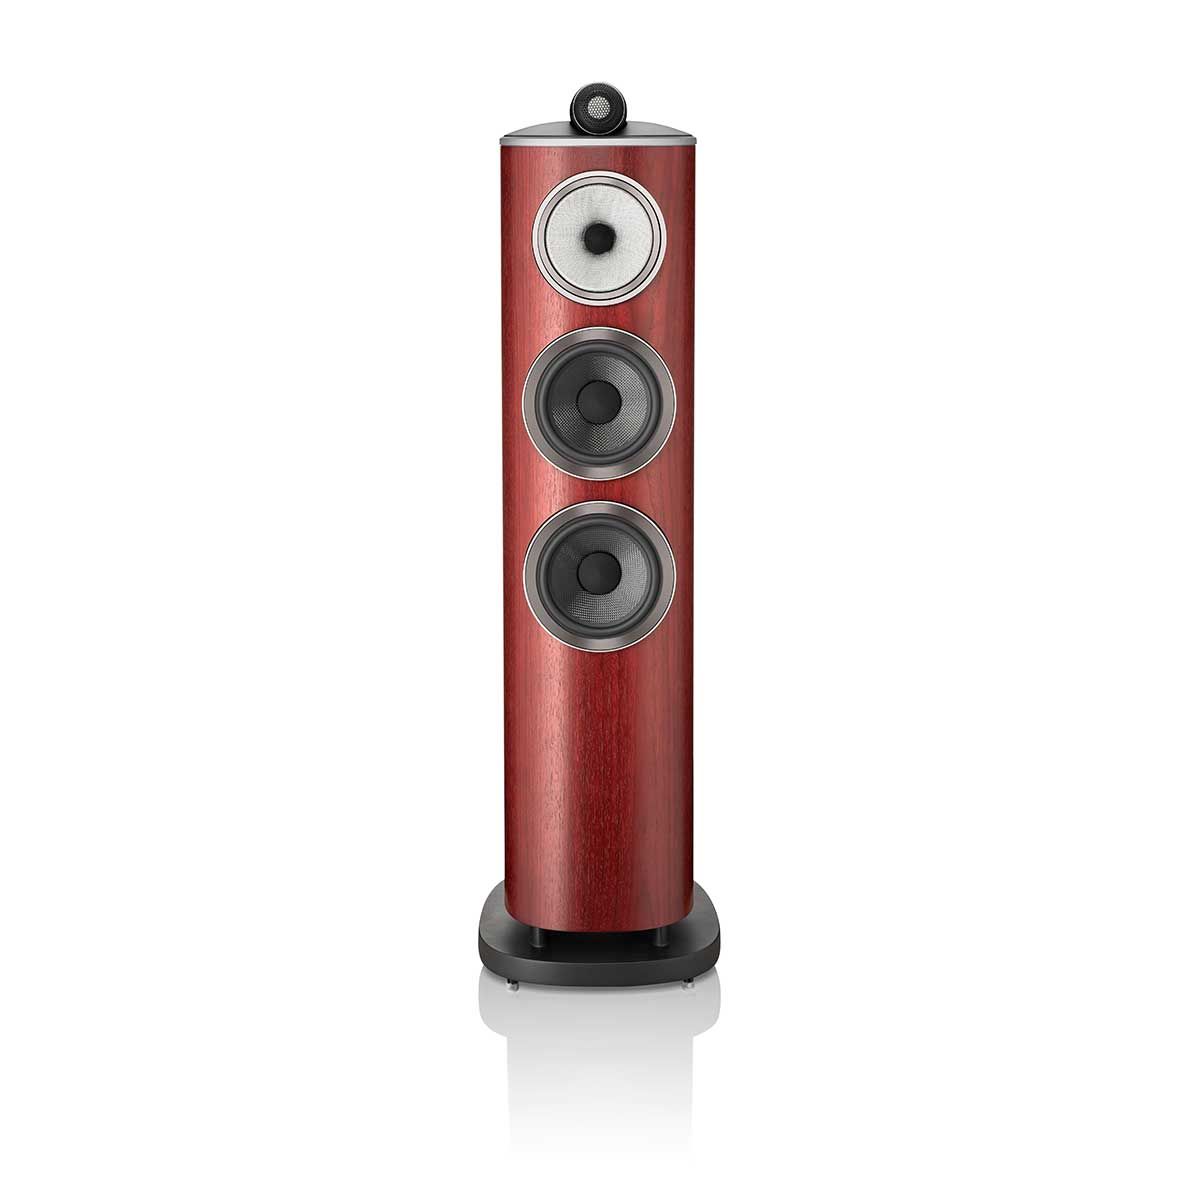 Bowers & Wilkins 804 D4 Floorstanding Speaker, Satin Rosenut, front view without grille